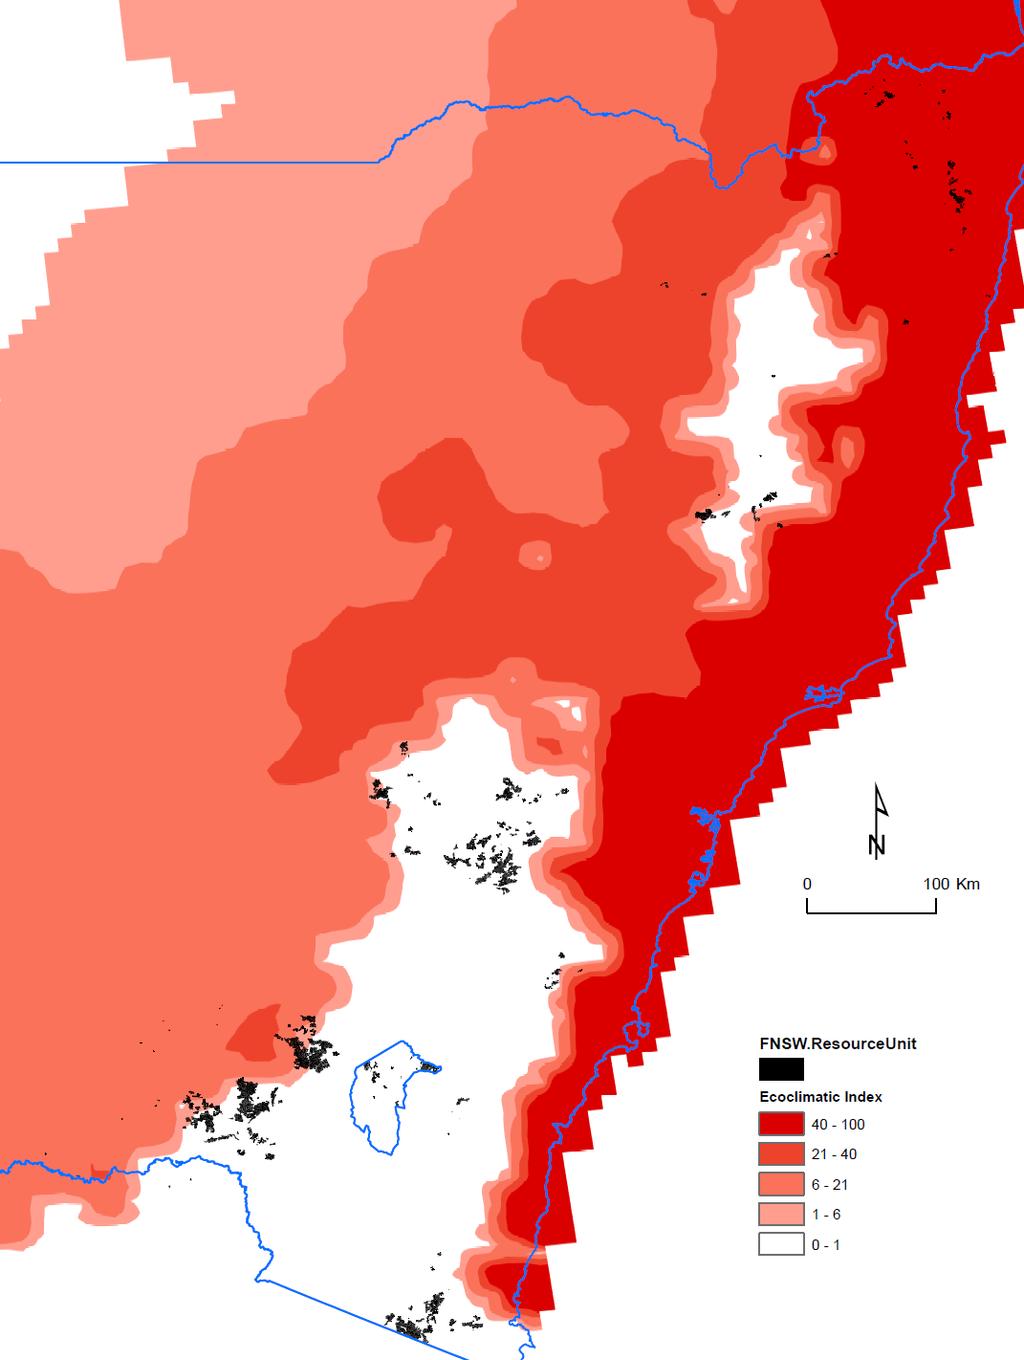 Figure 5: New South Wales showing potential range of Monochamus alternatus, and by association, pine wilt disease. Modelled climatic suitability for M.